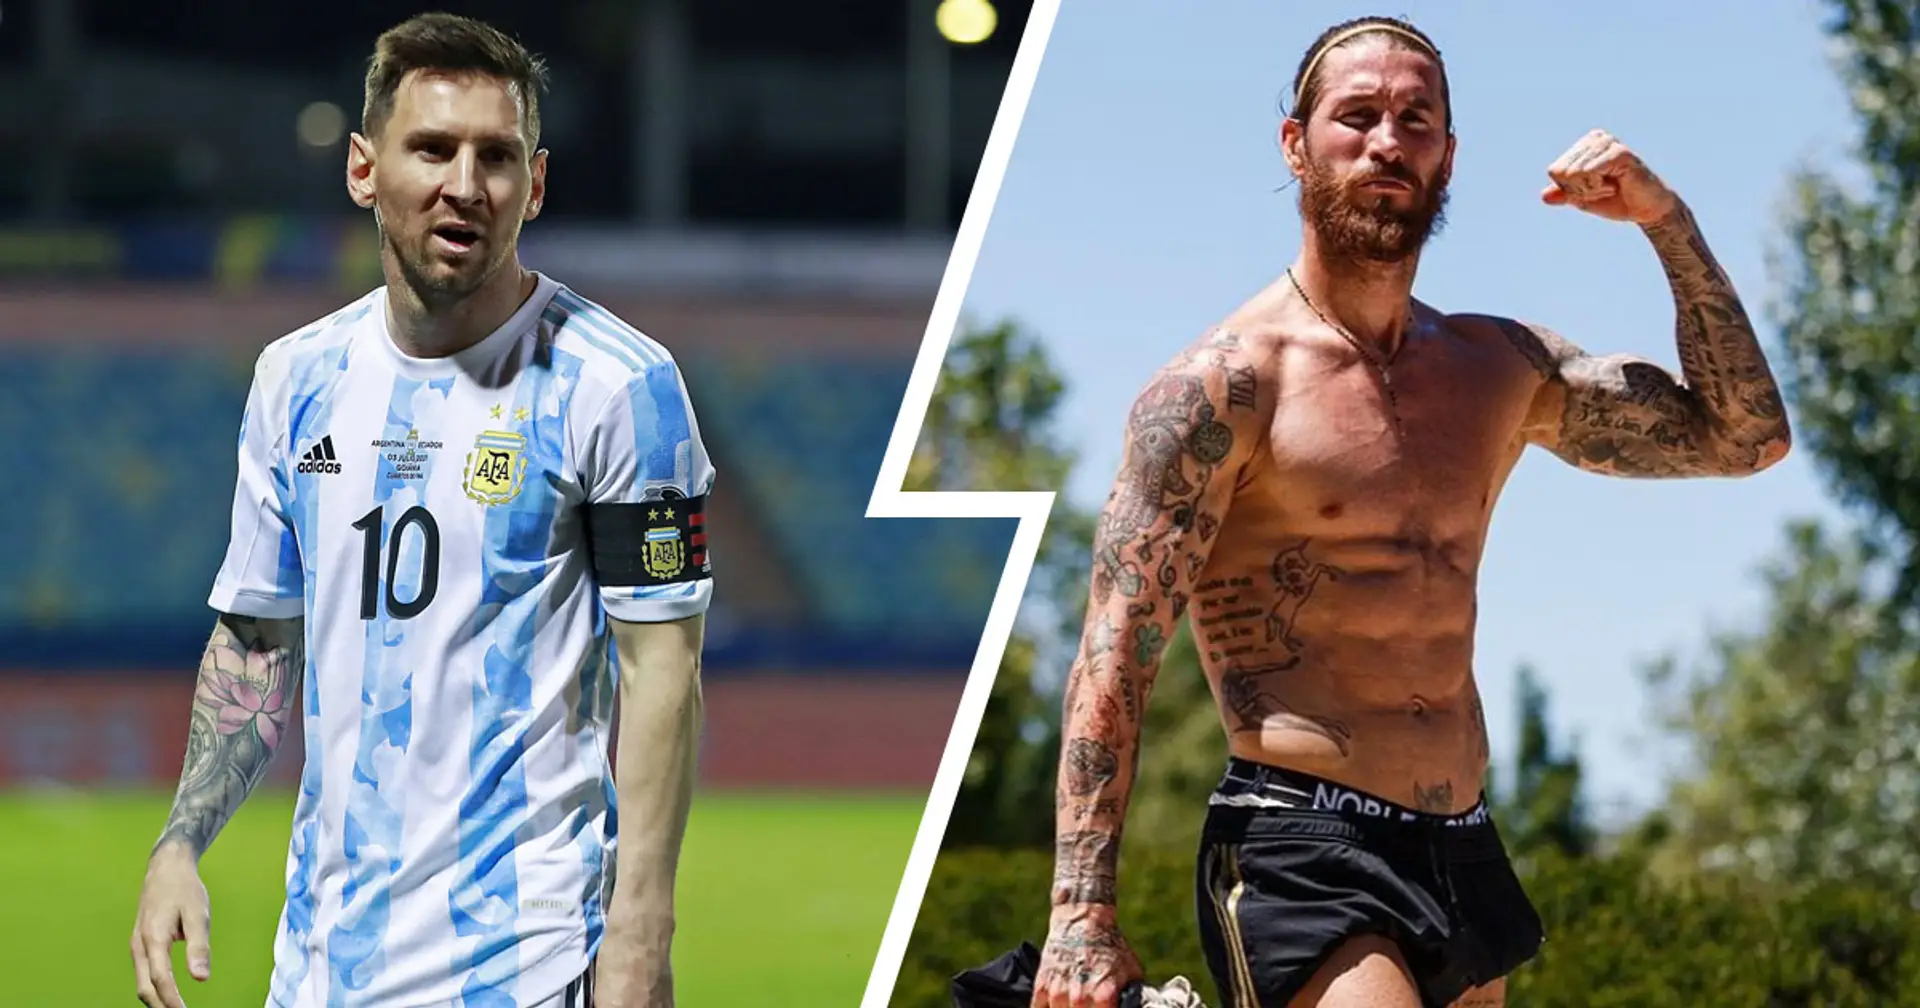 PSG 'blown away' by Ramos fitness, Messi hilariously mocks Mina & more: 6 best stories of the day